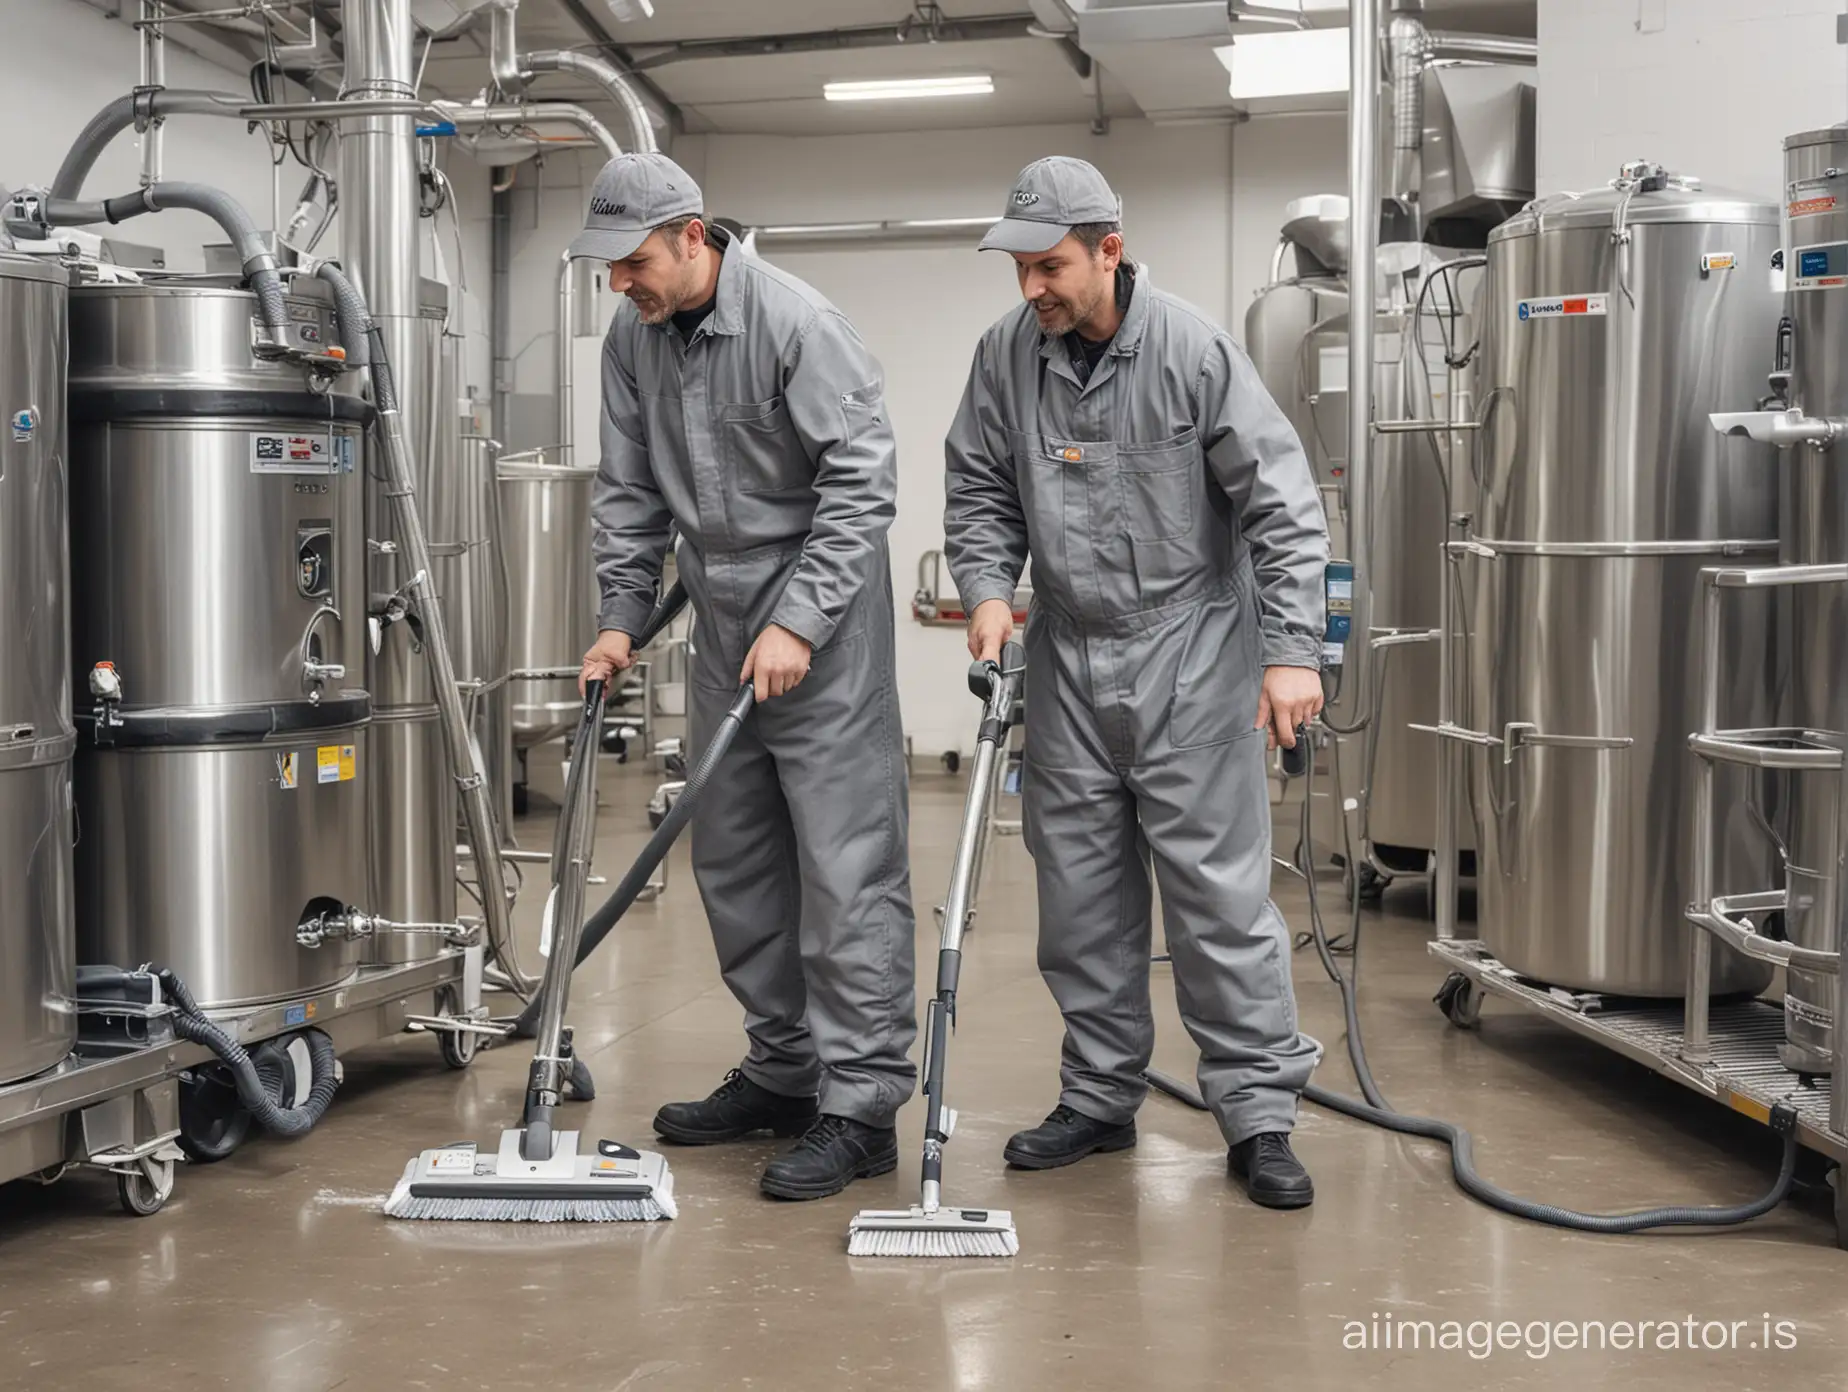 Two men. In the process of washing the floor using a floor cleaning machine. Wearing gray coveralls. Wearing a gray cap on the head. Next to them is a vacuum cleaner and a ladder. In the background, there is a food workshop with large stainless steel tanks.